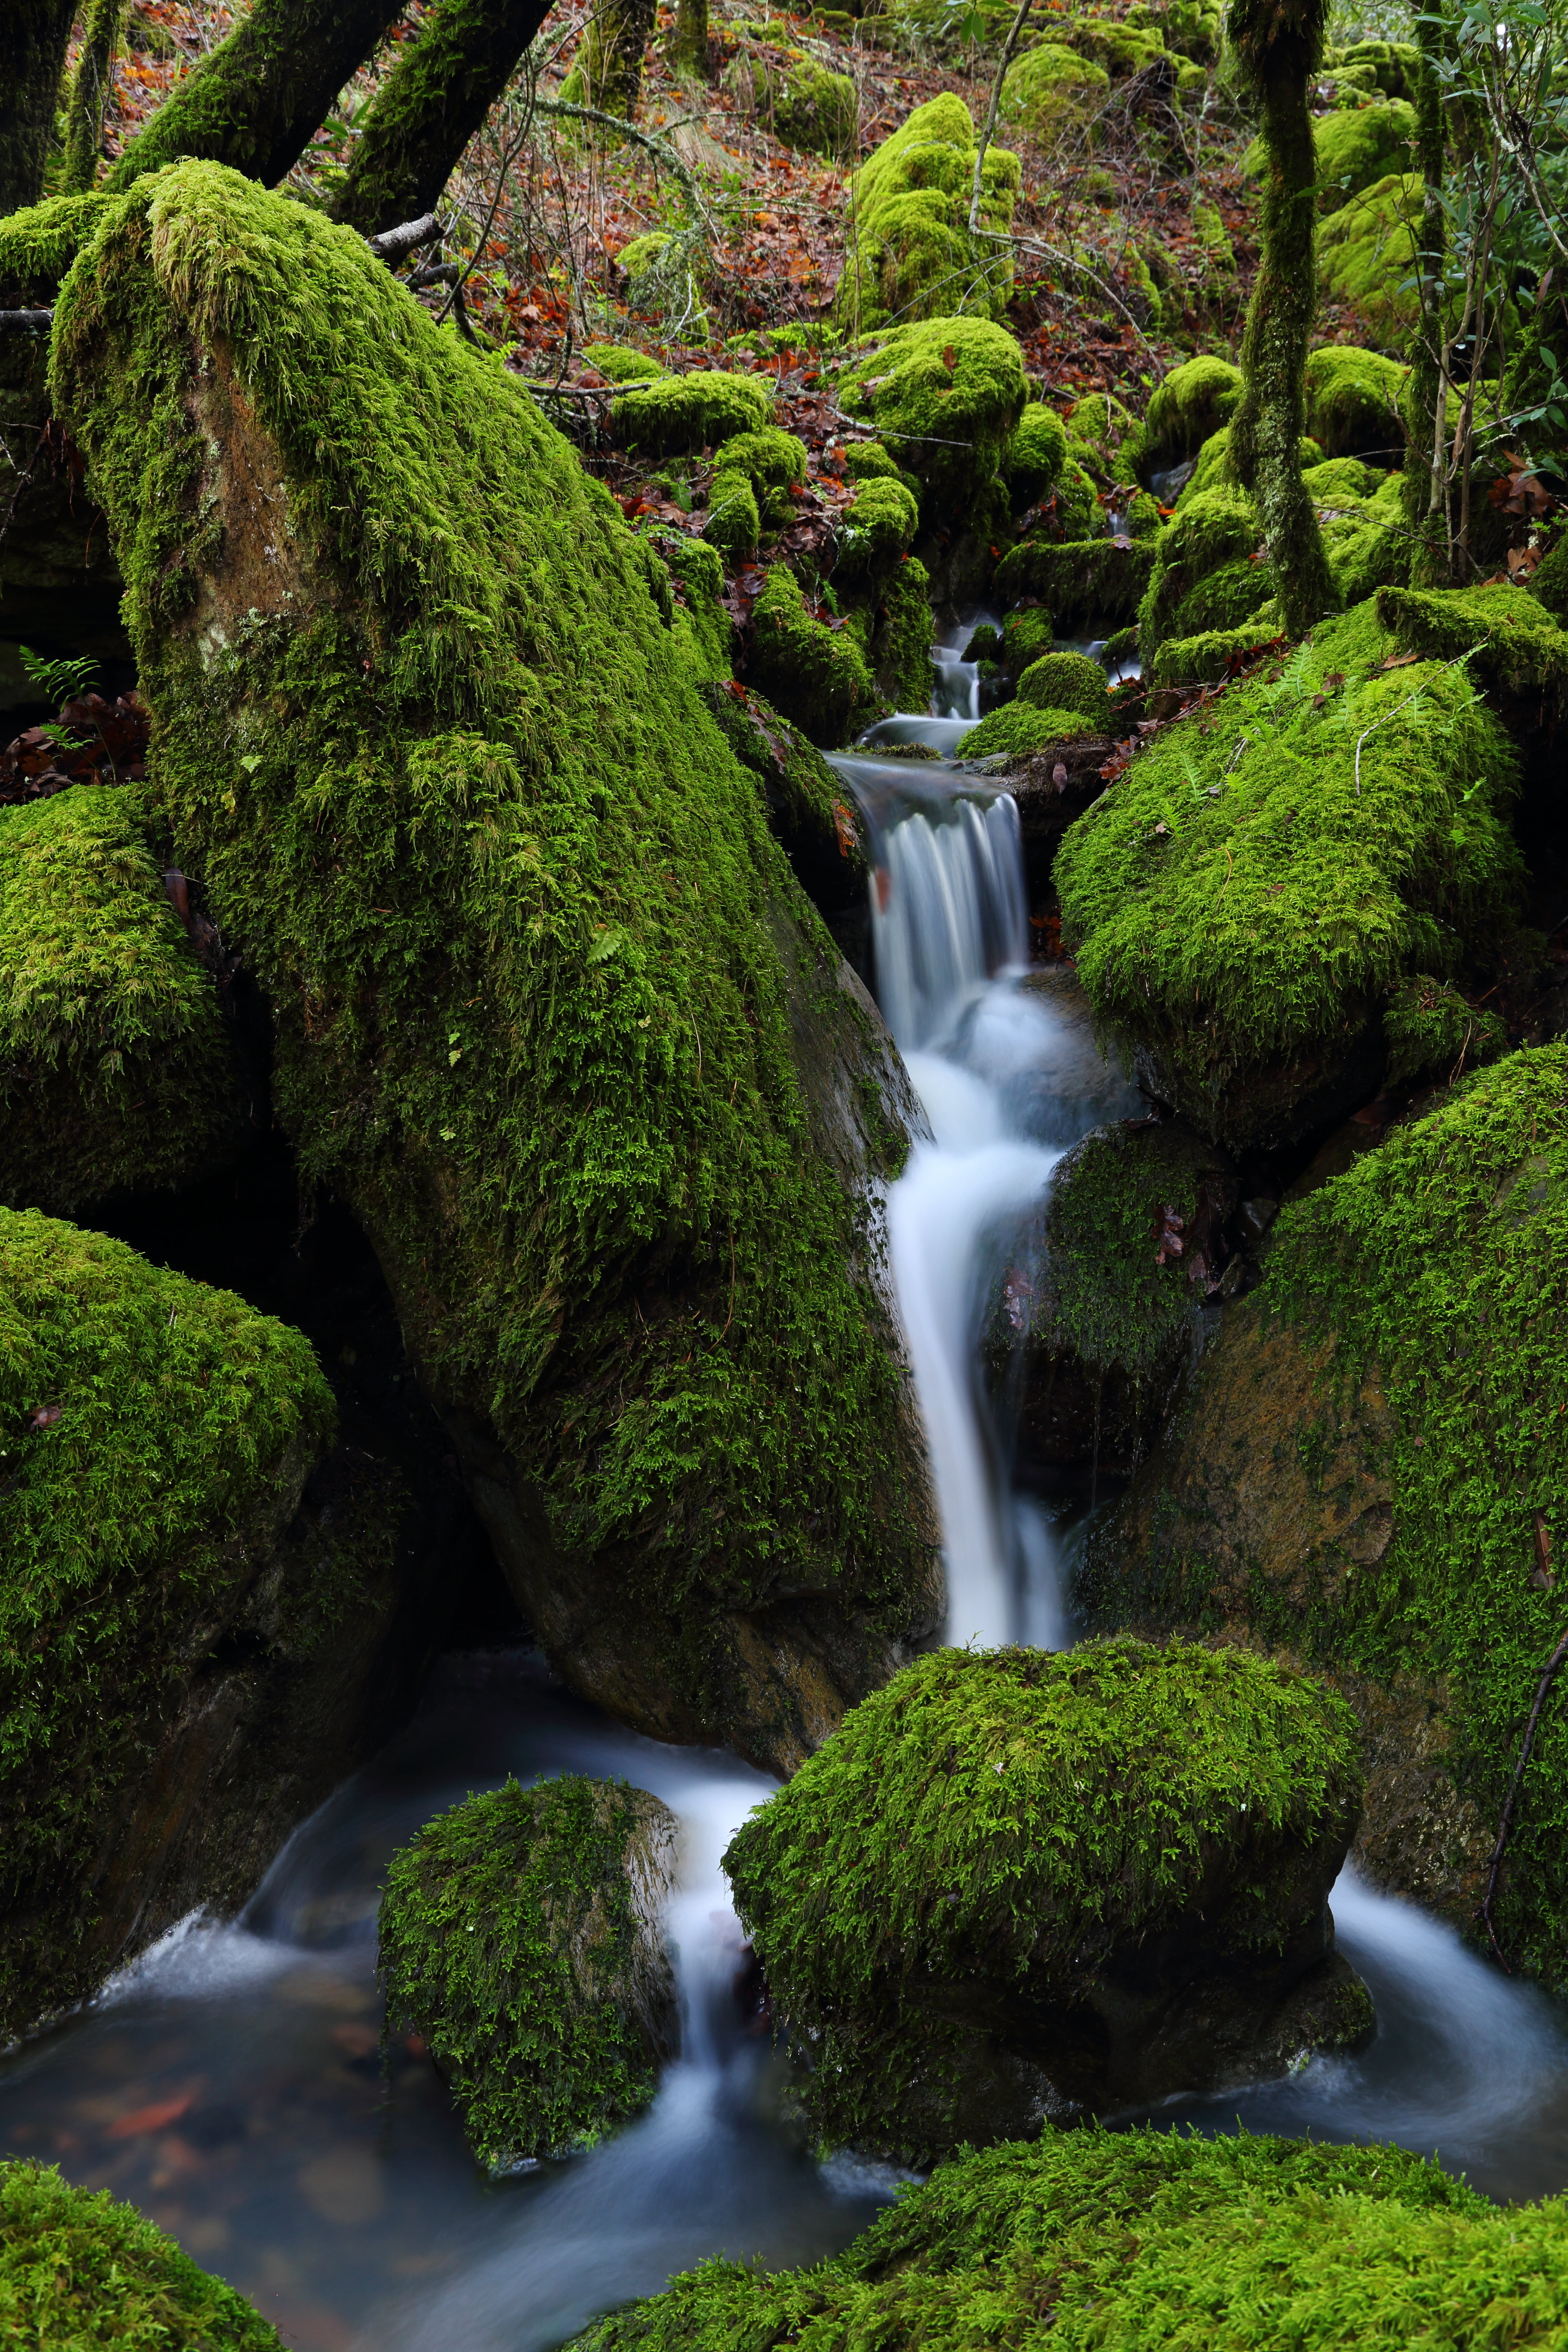 green trees near rocks with grass and falls, california